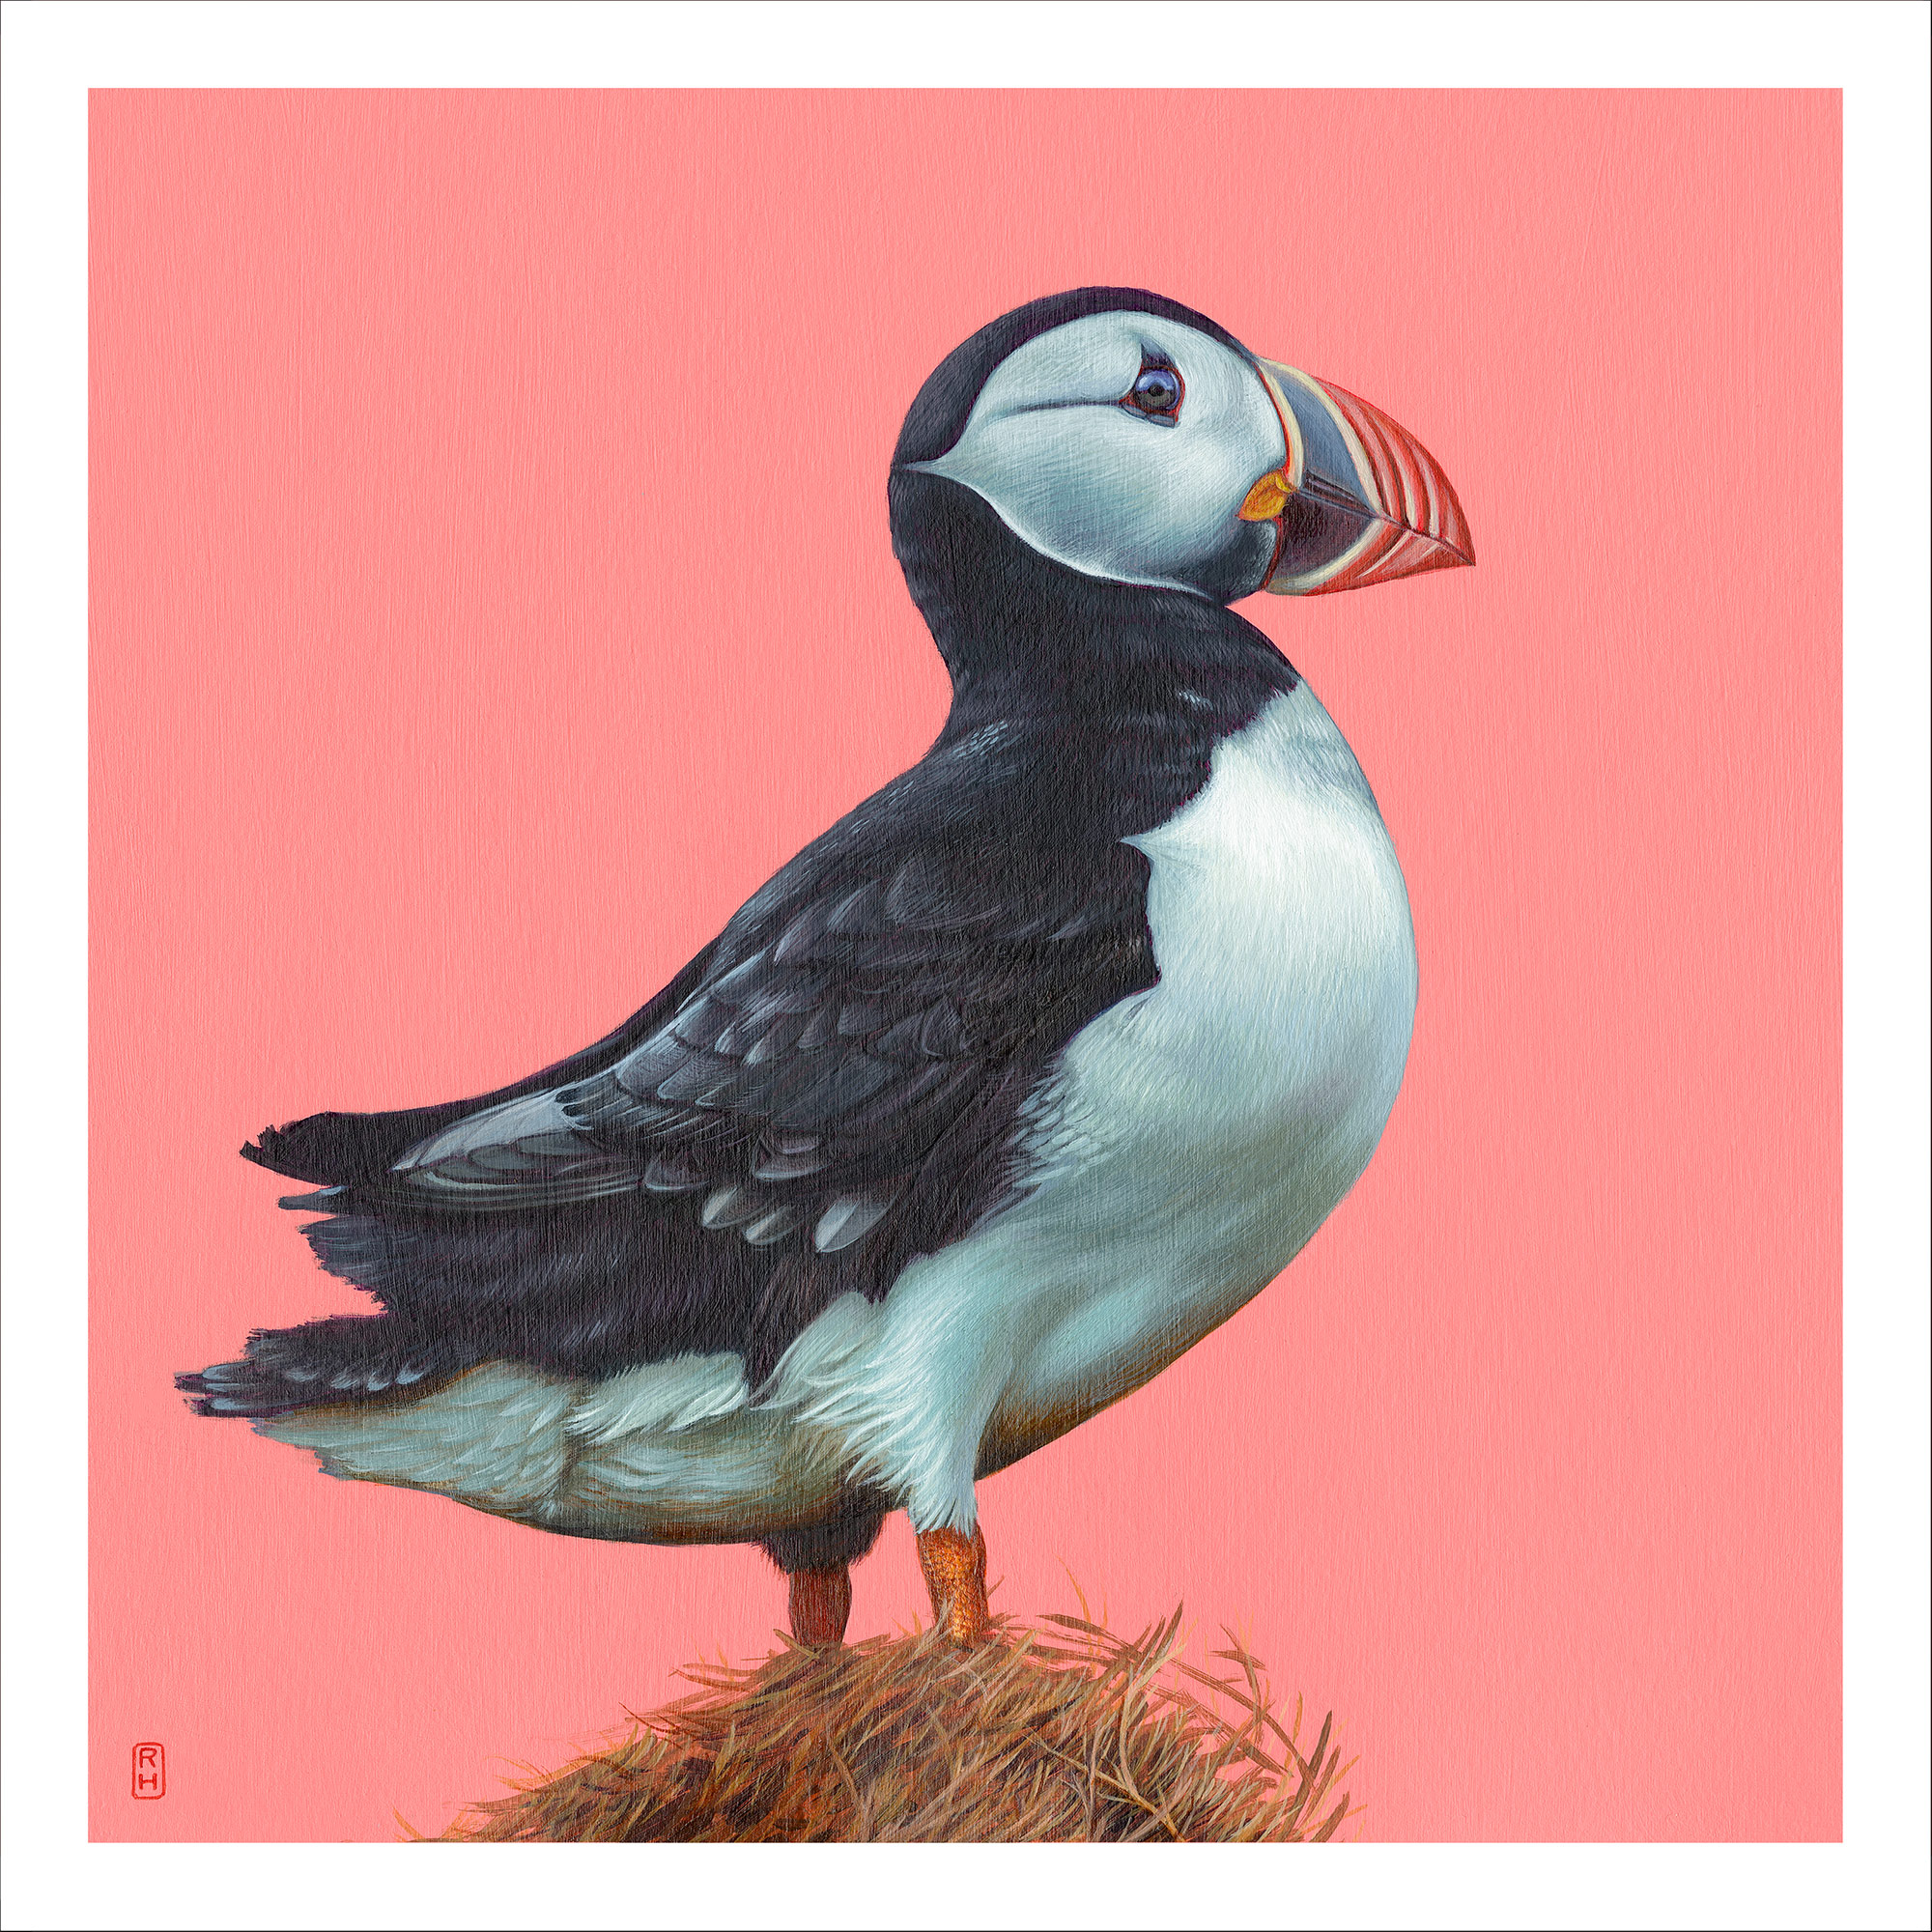 Painting of a puffin